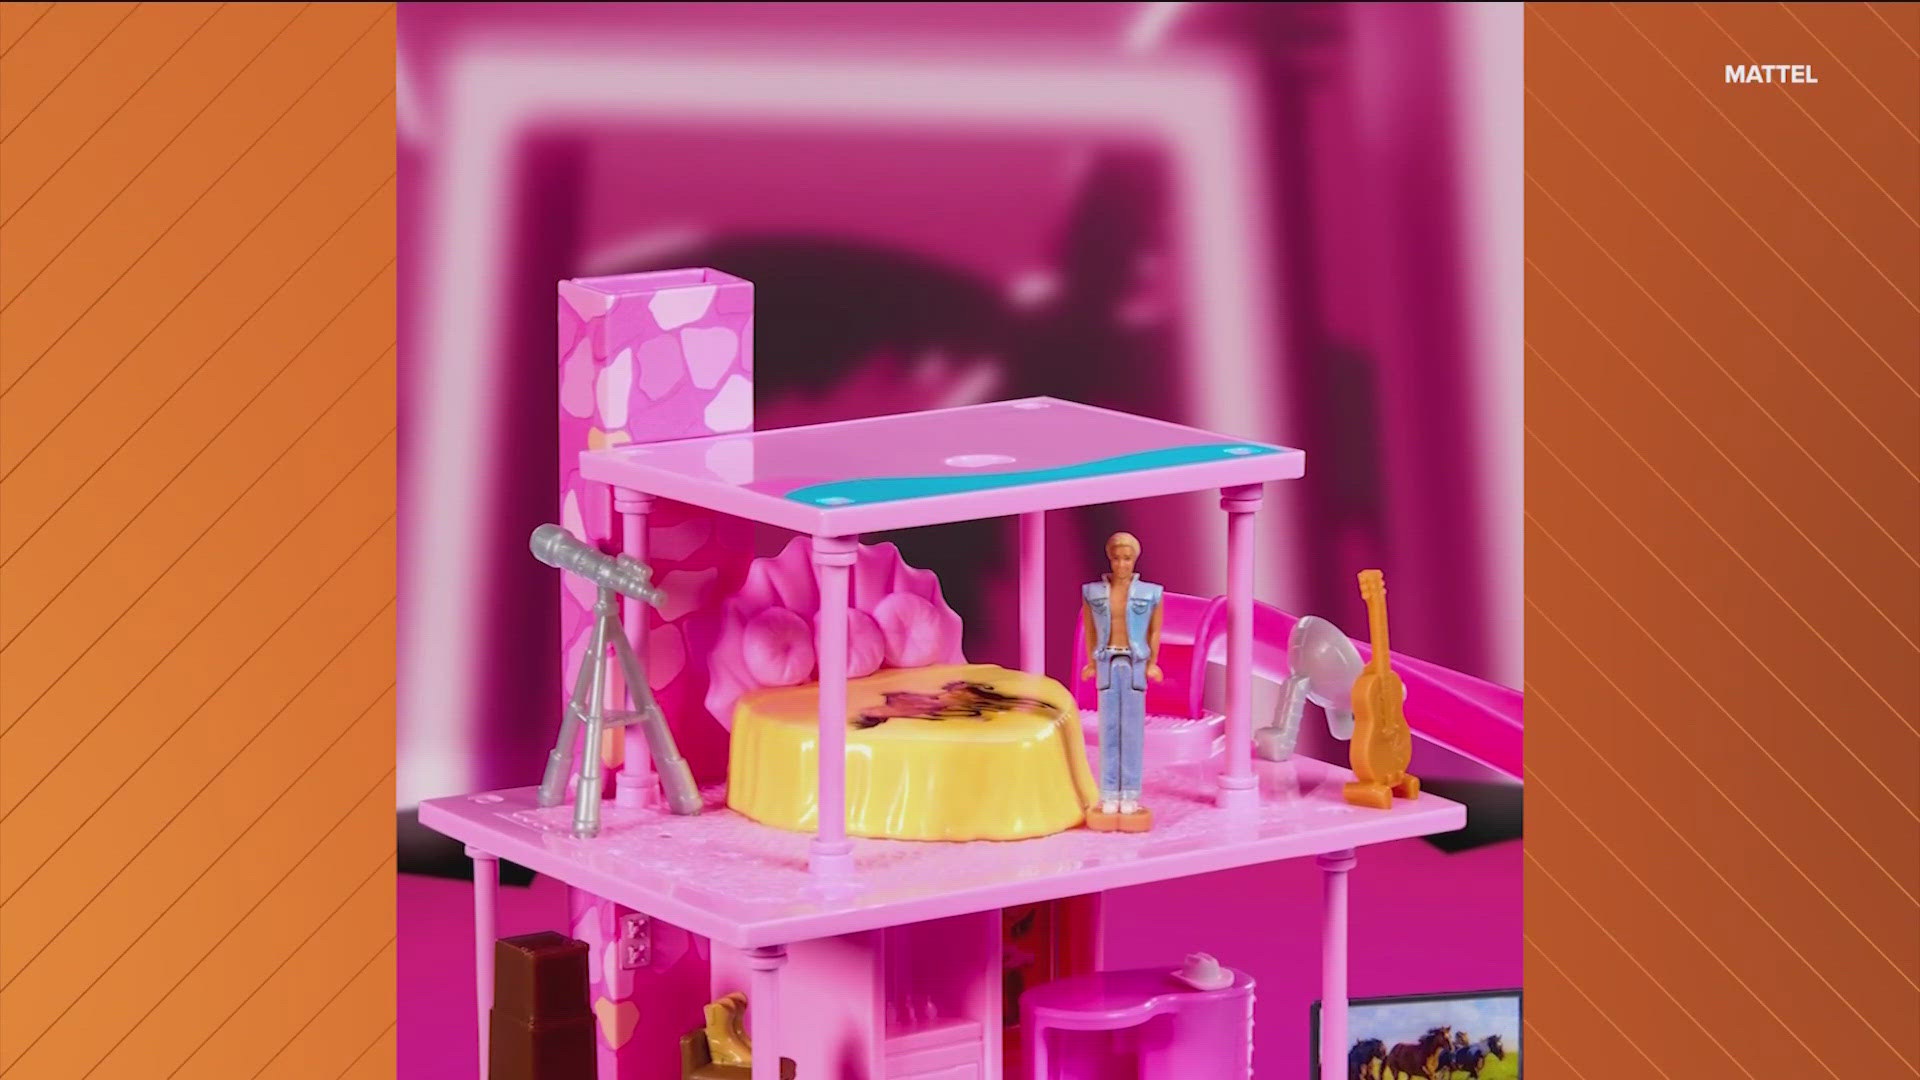 The set will include a Ken doll, guitar, mini fridges and more.